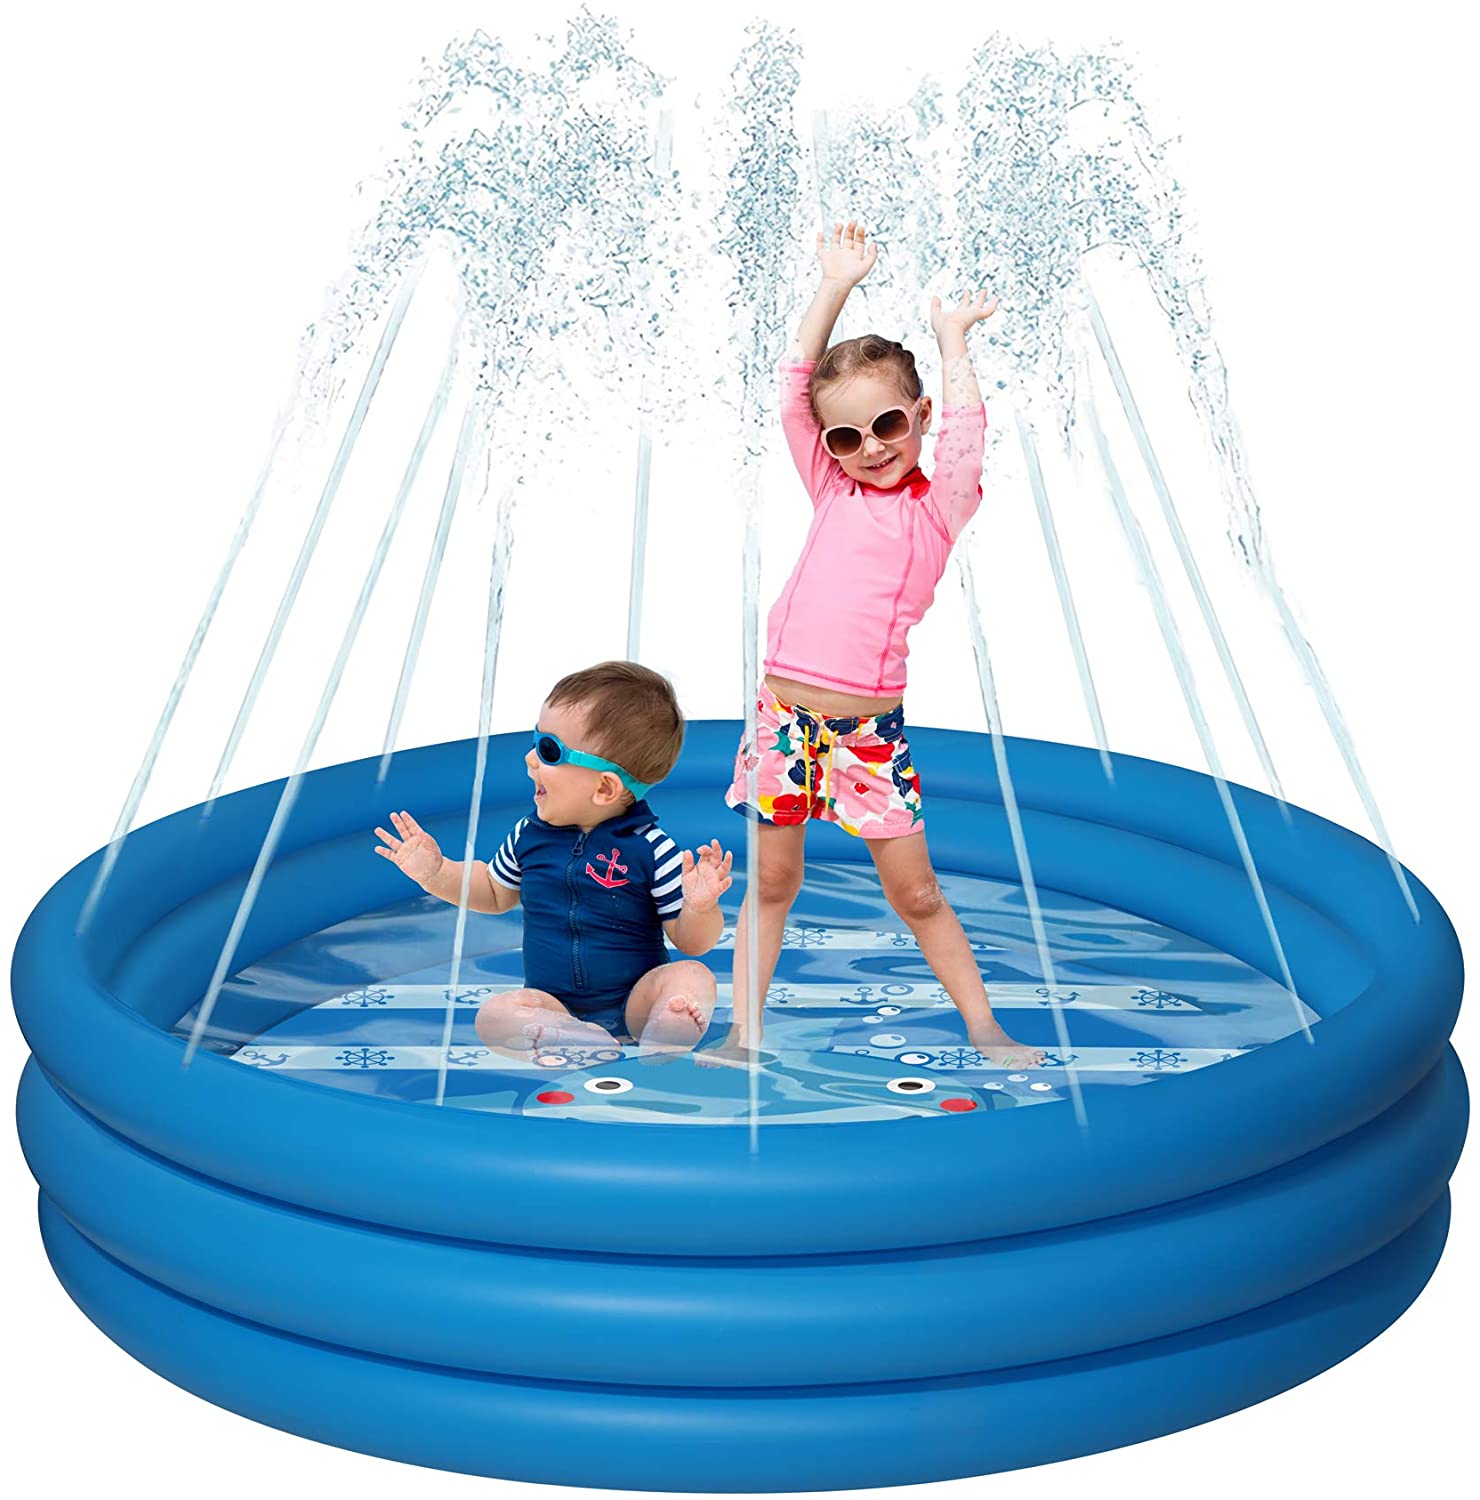 Inflatable Pool Reviews